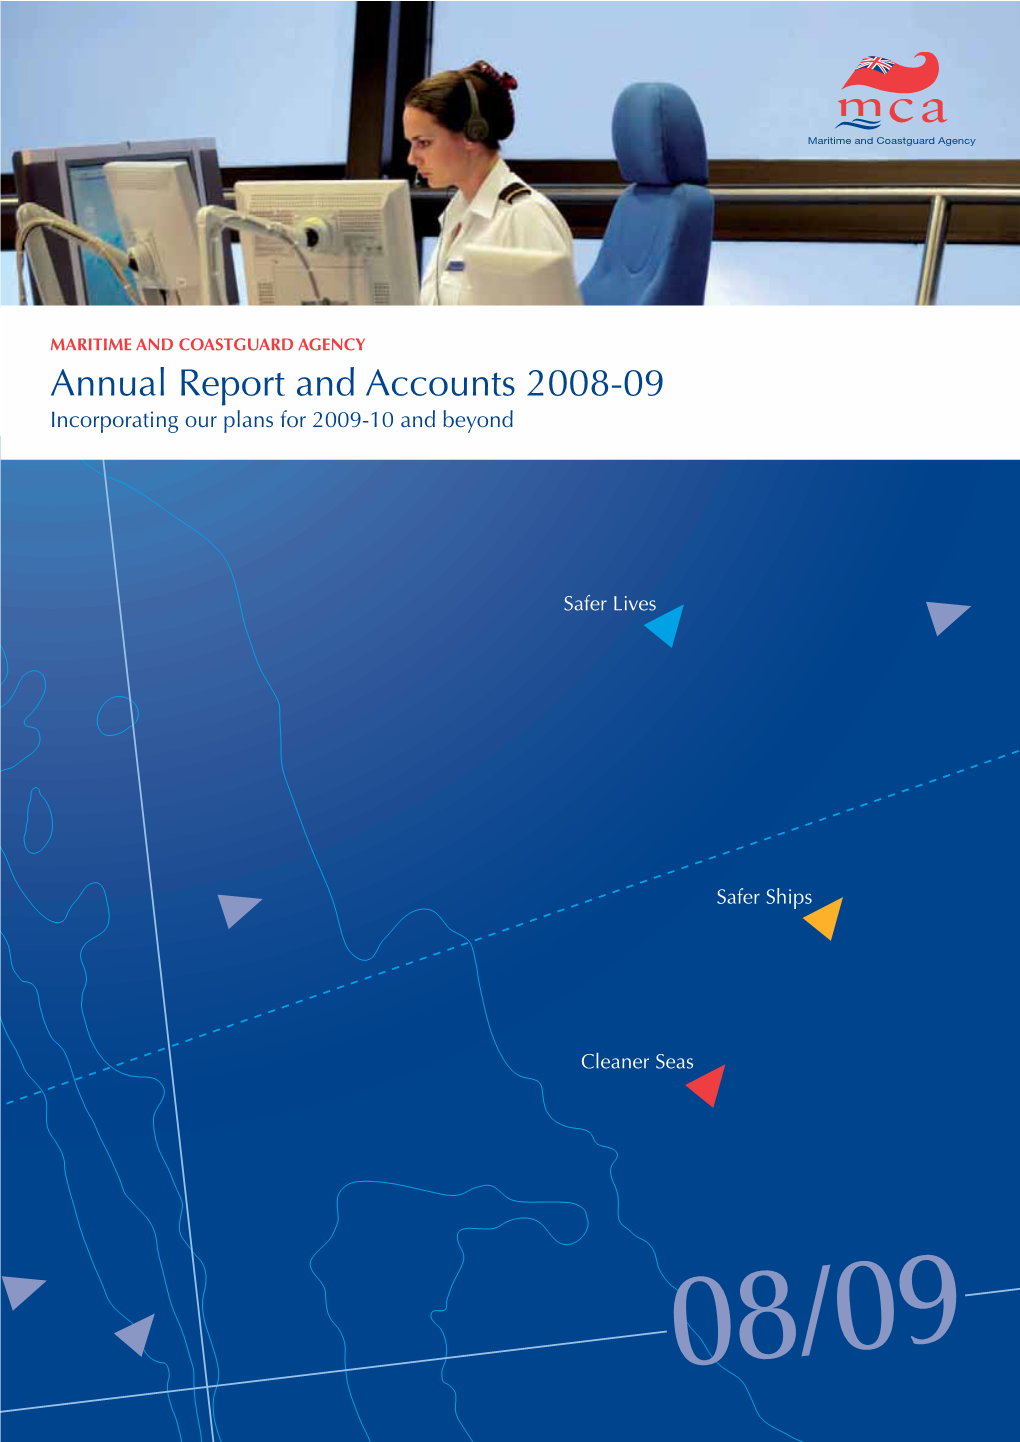 MARITIME and COASTGUARD AGENCY Annual Report and Accounts 2008-09 Incorporating Our Plans for 2009-10 and Beyond